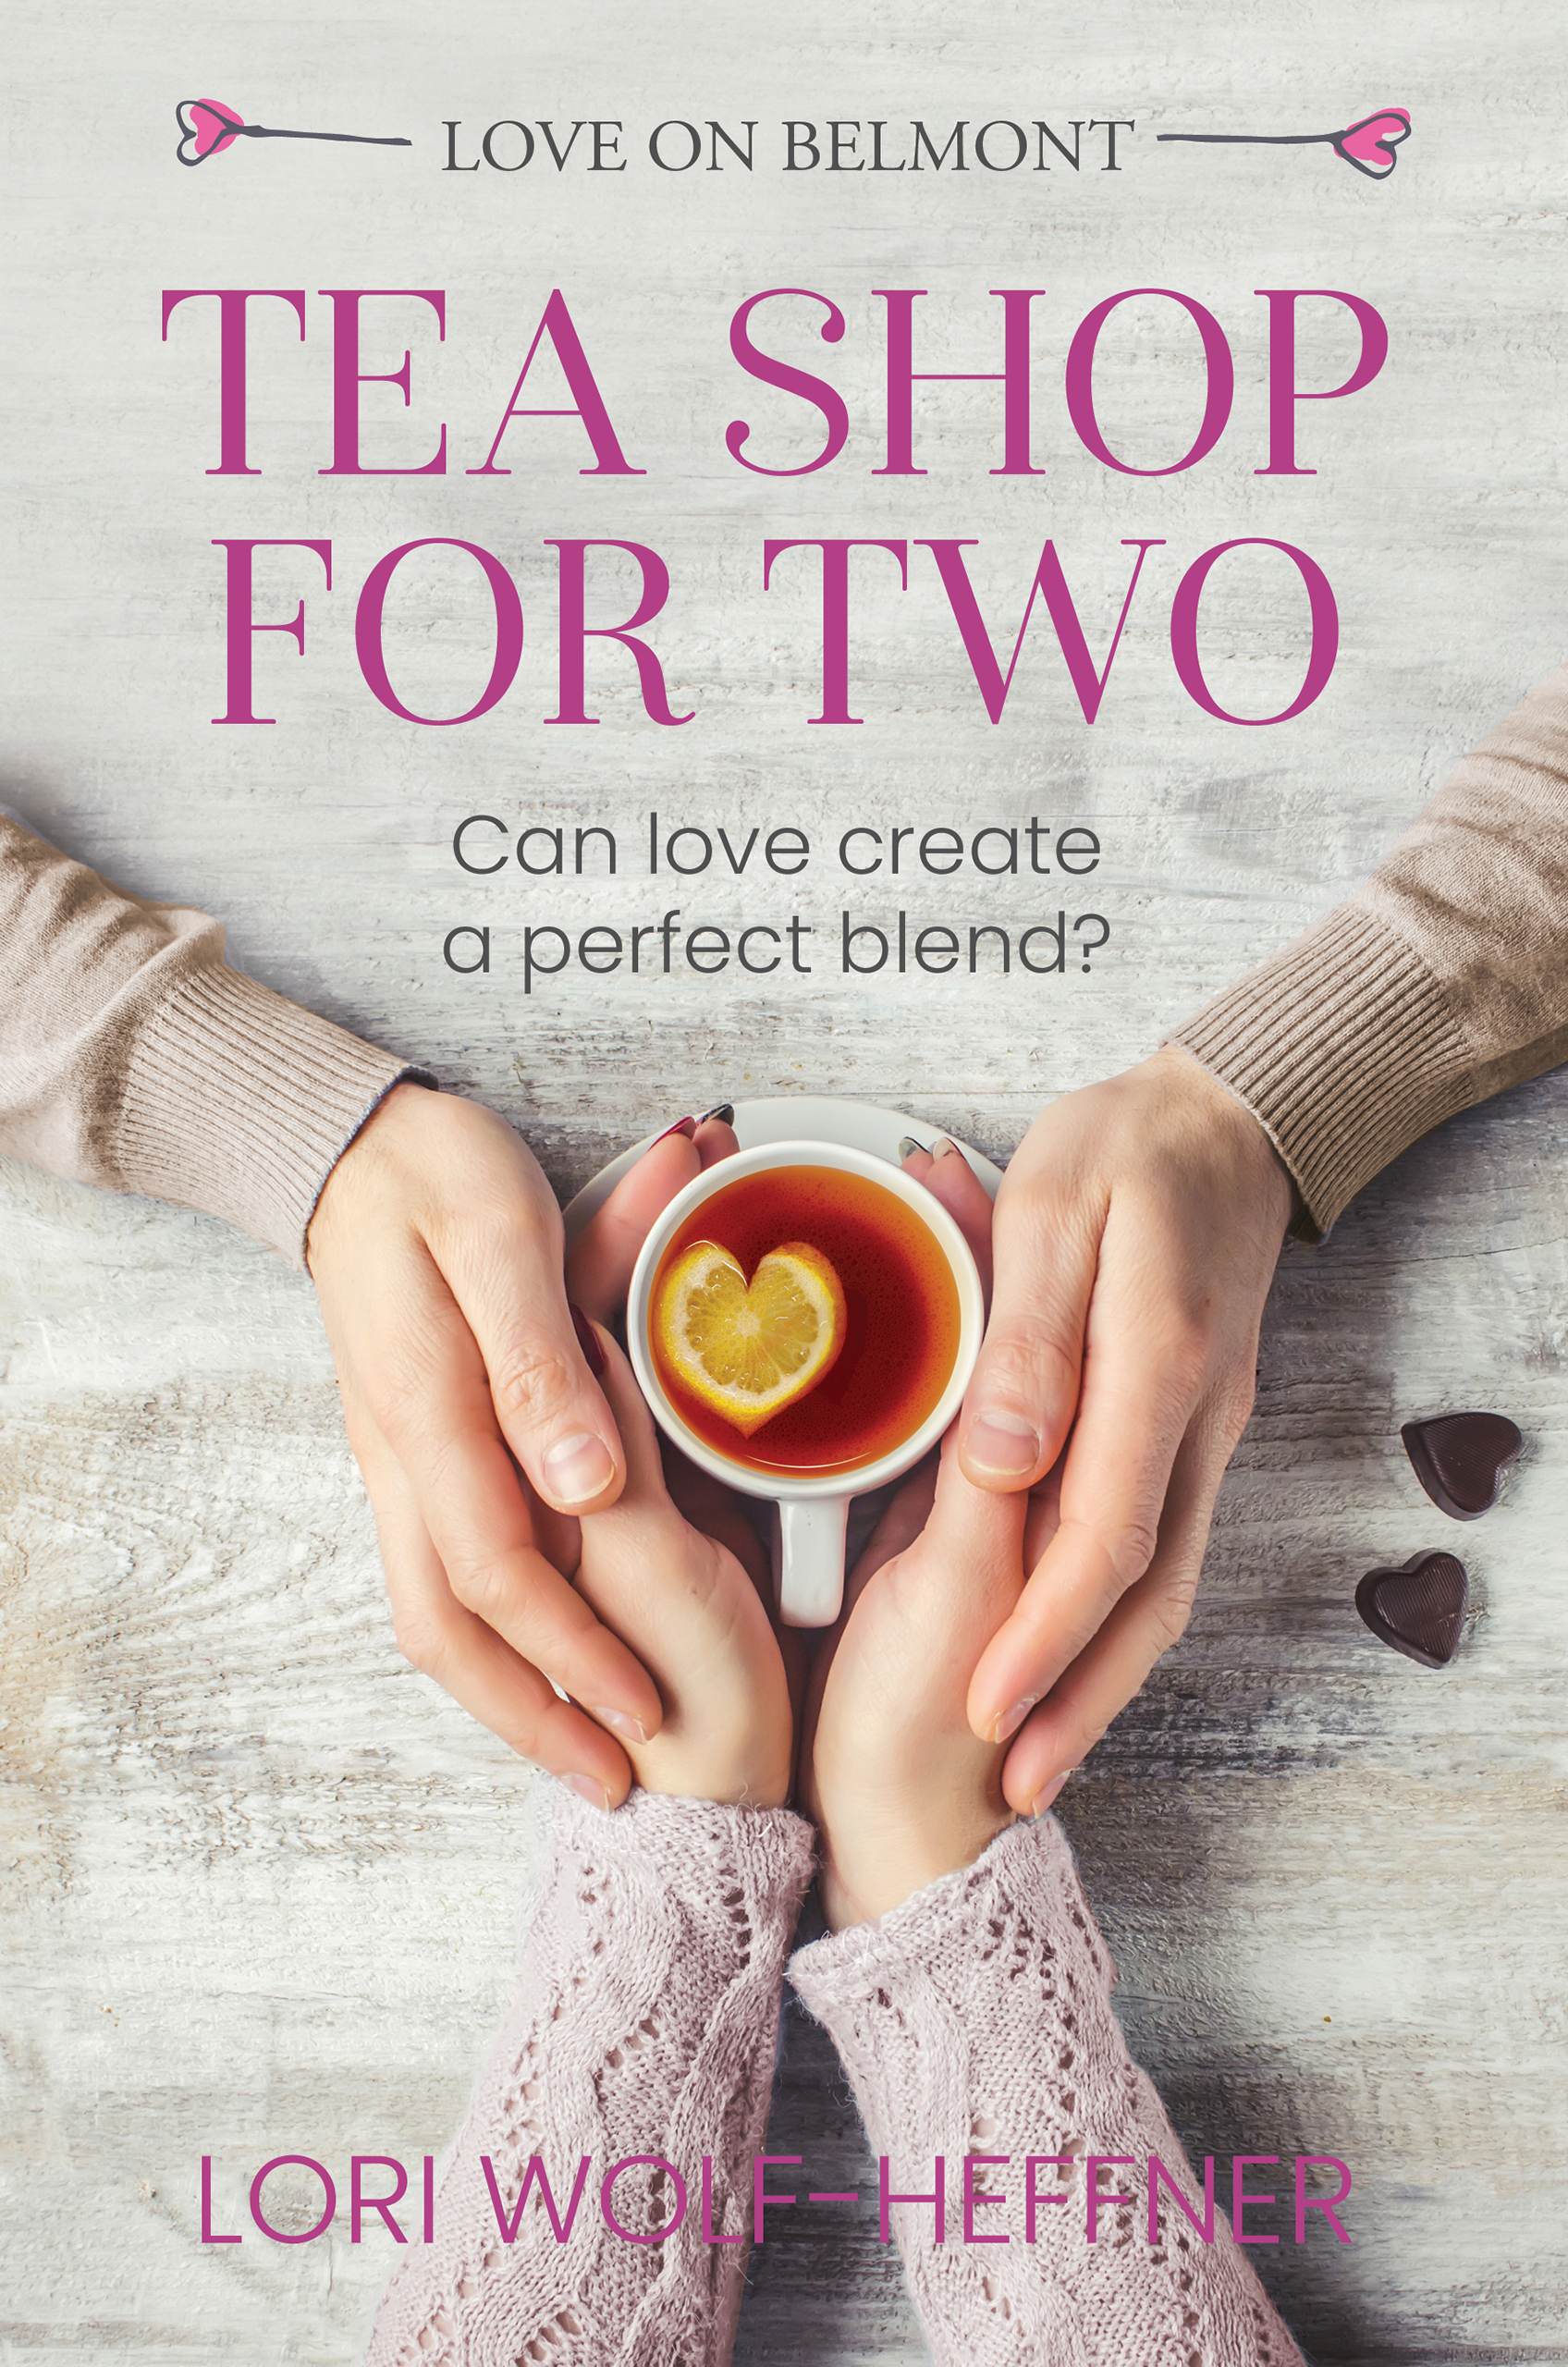 1: Tea Shop for Two